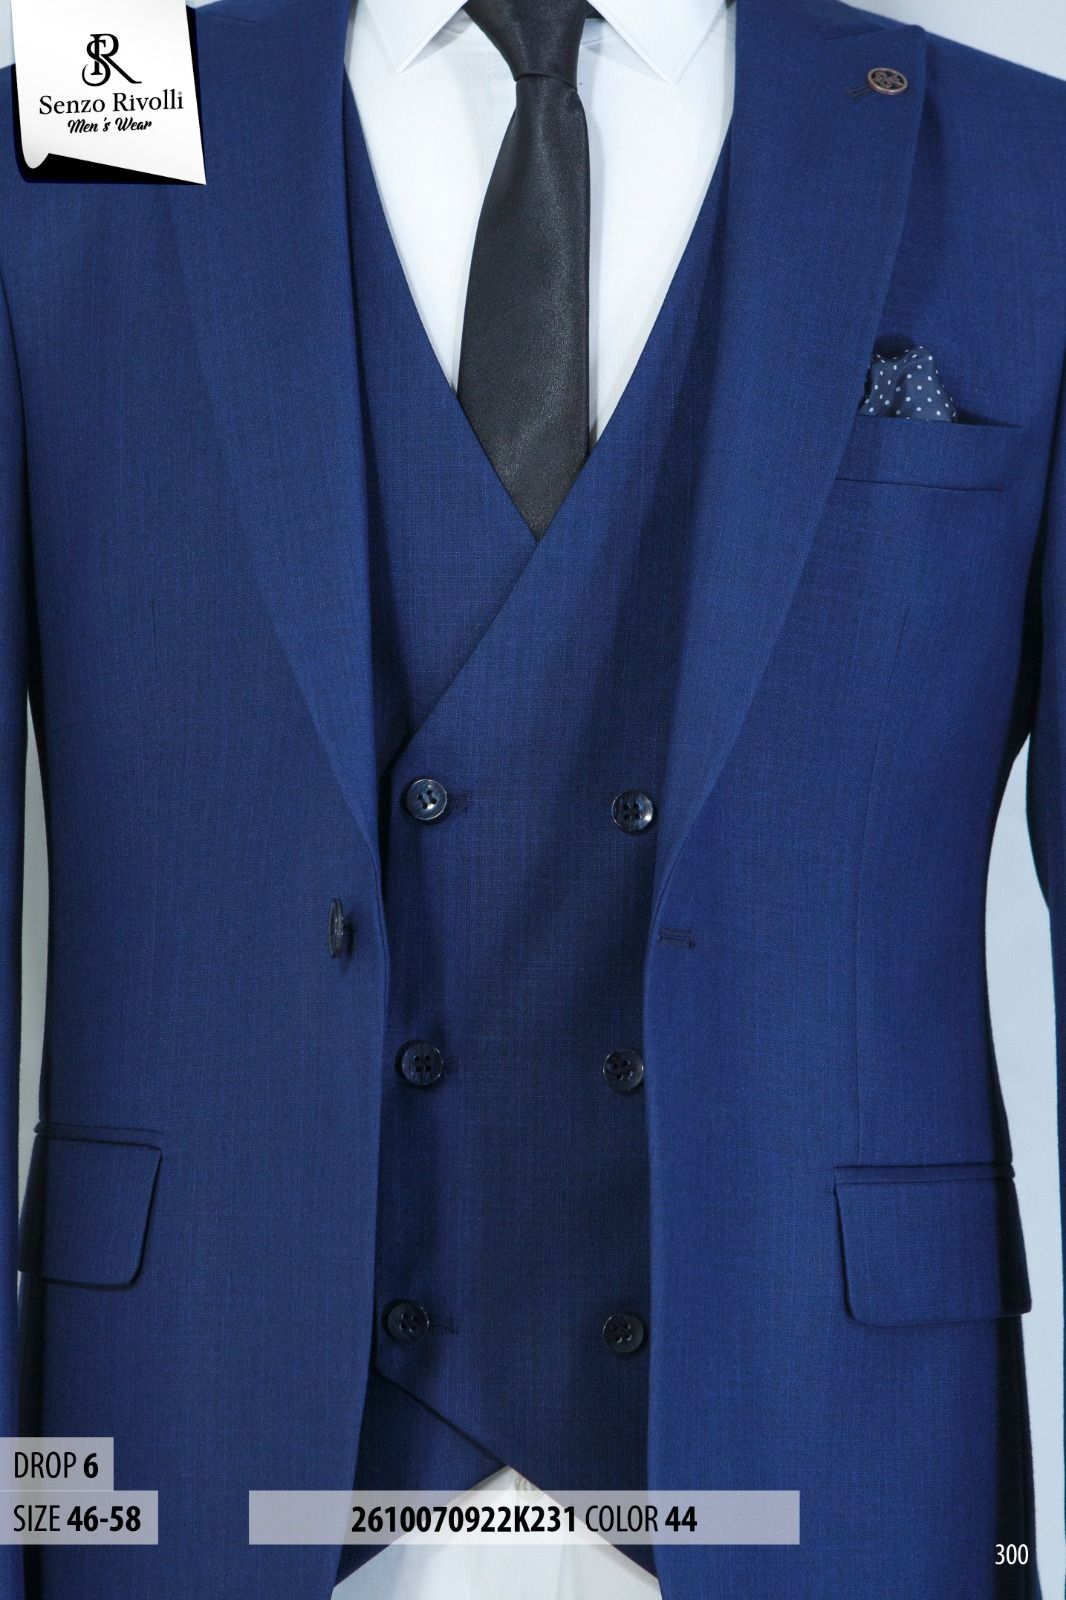 EXECUTIVE LIGHT BLUE 3 PIECE TURKEY SUIT WITH ONE BUTON-deluxe.com.ng